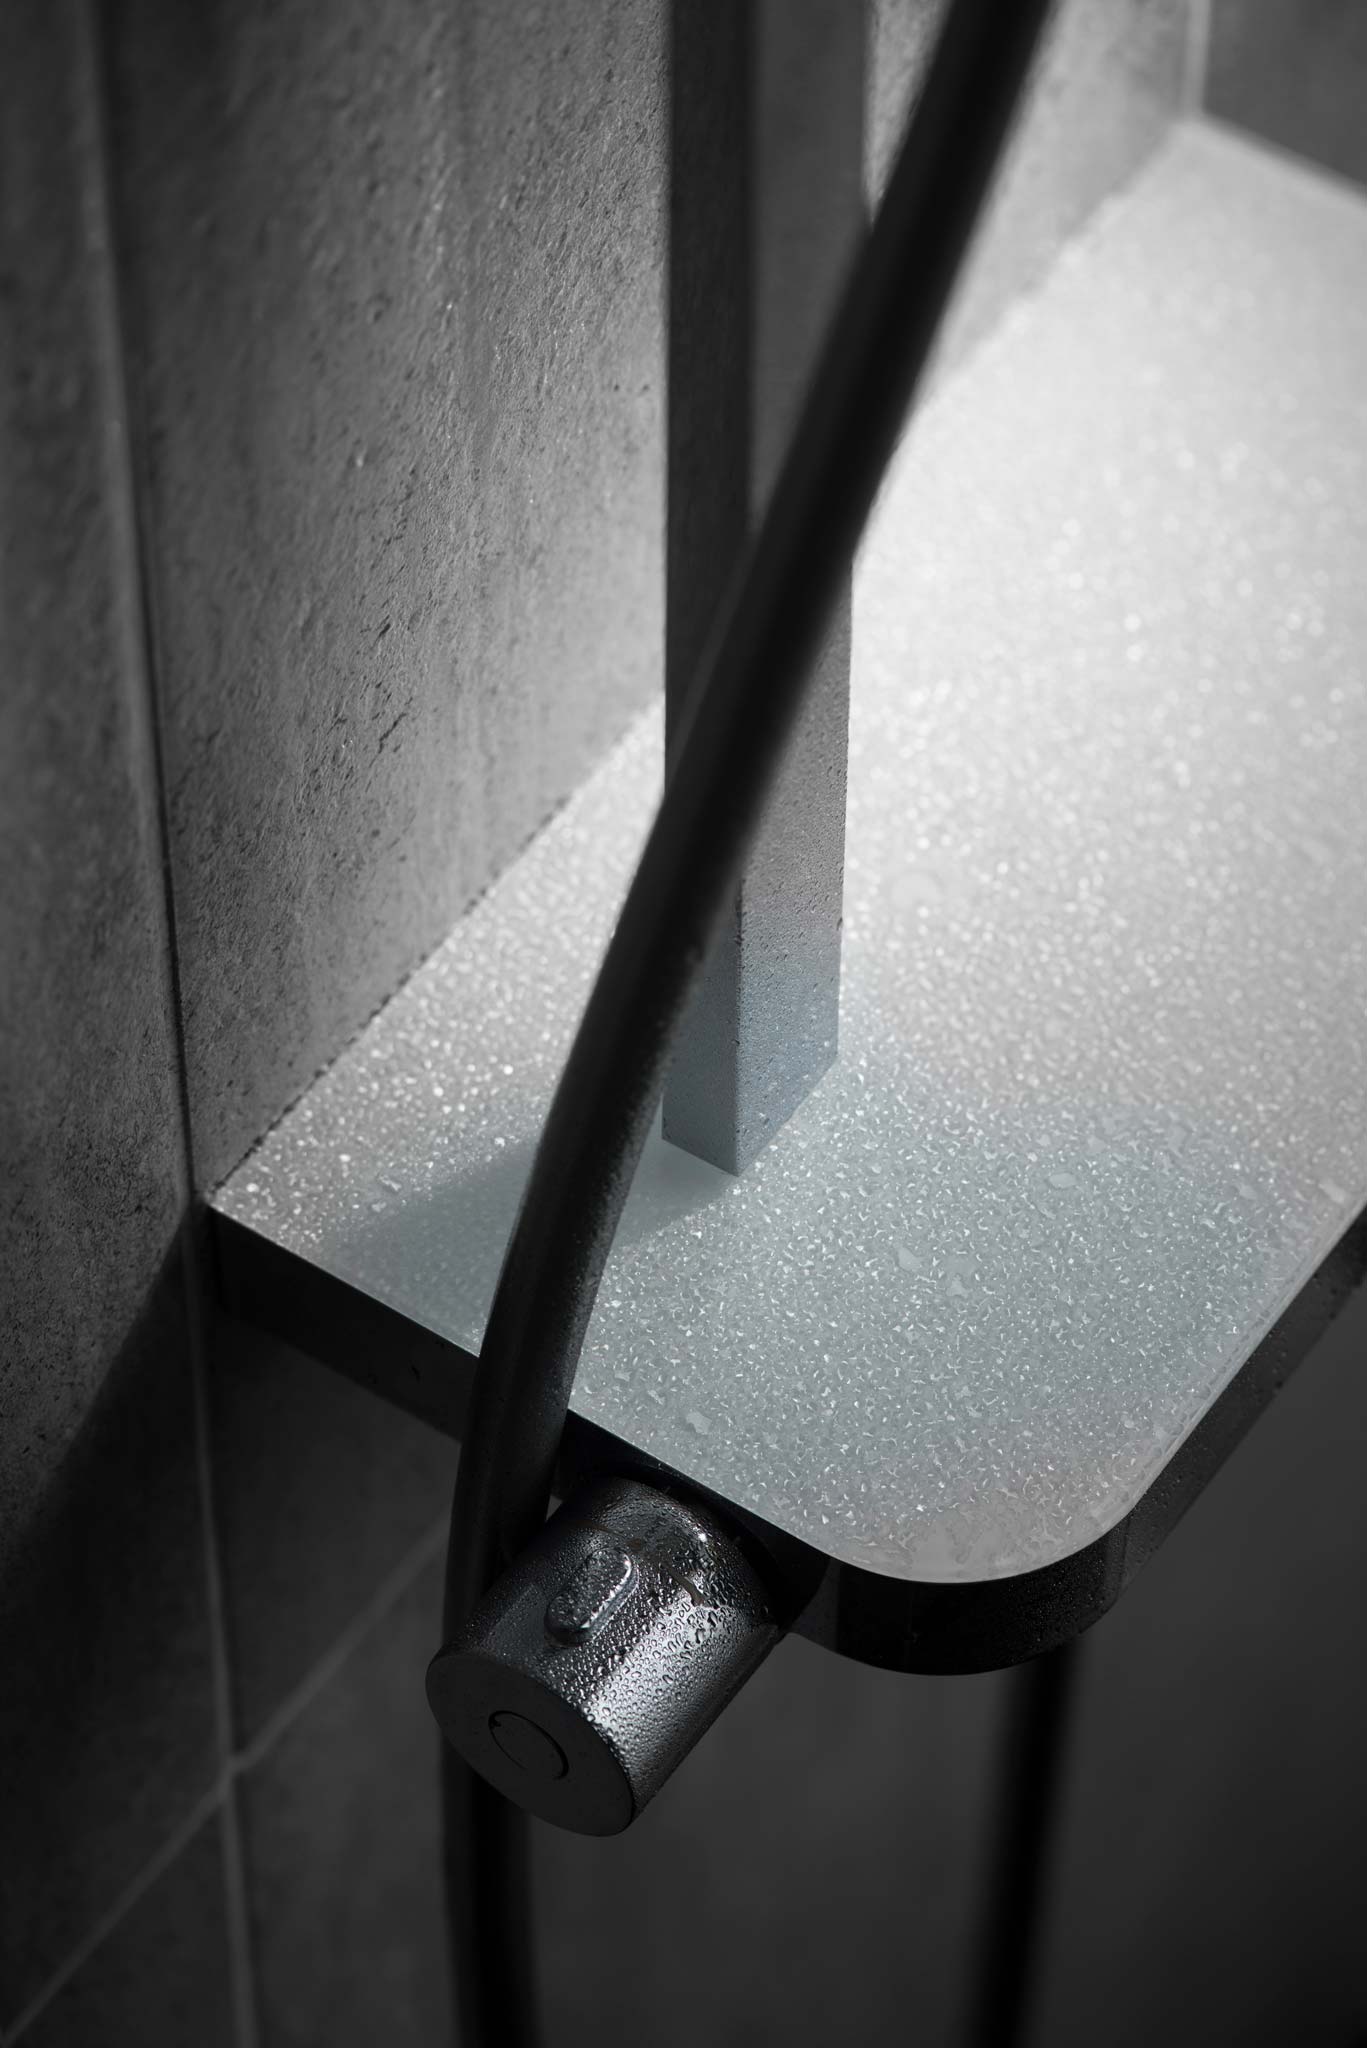 Overhead photograph of an integrated shower valve with shelf covered in water droplets